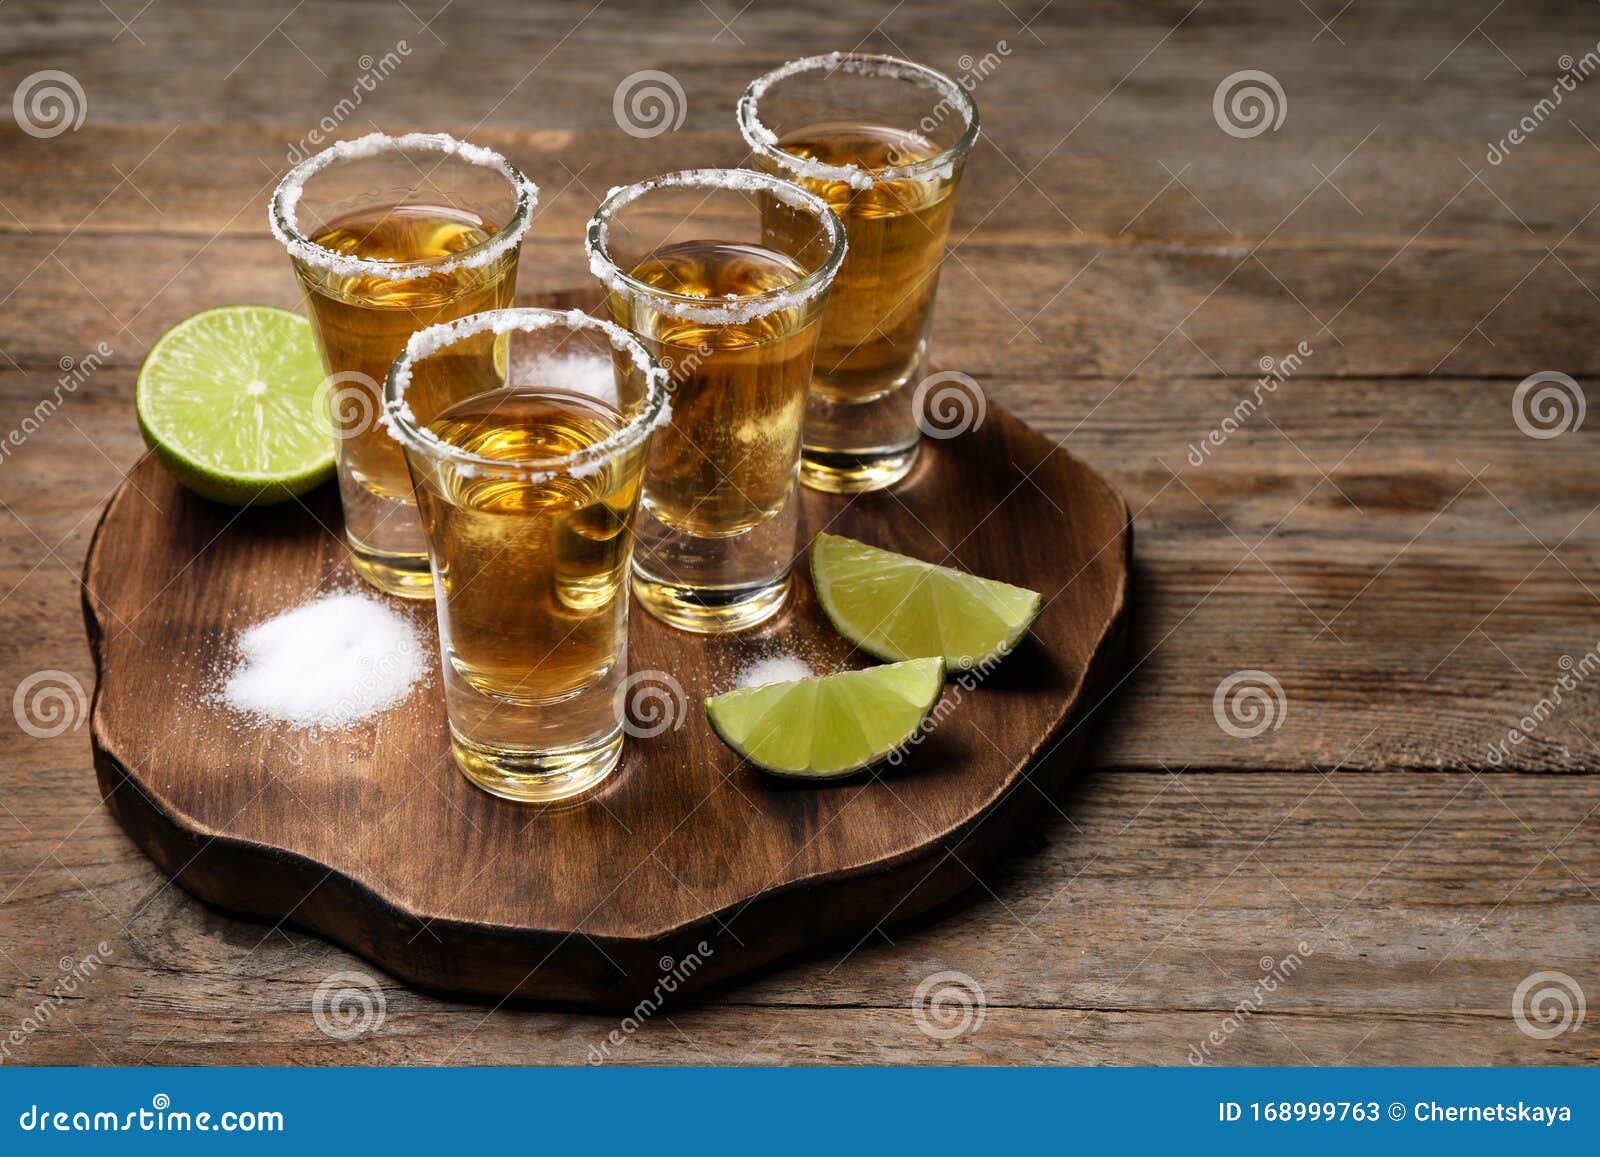 mexican tequila shots, lime and salt on table